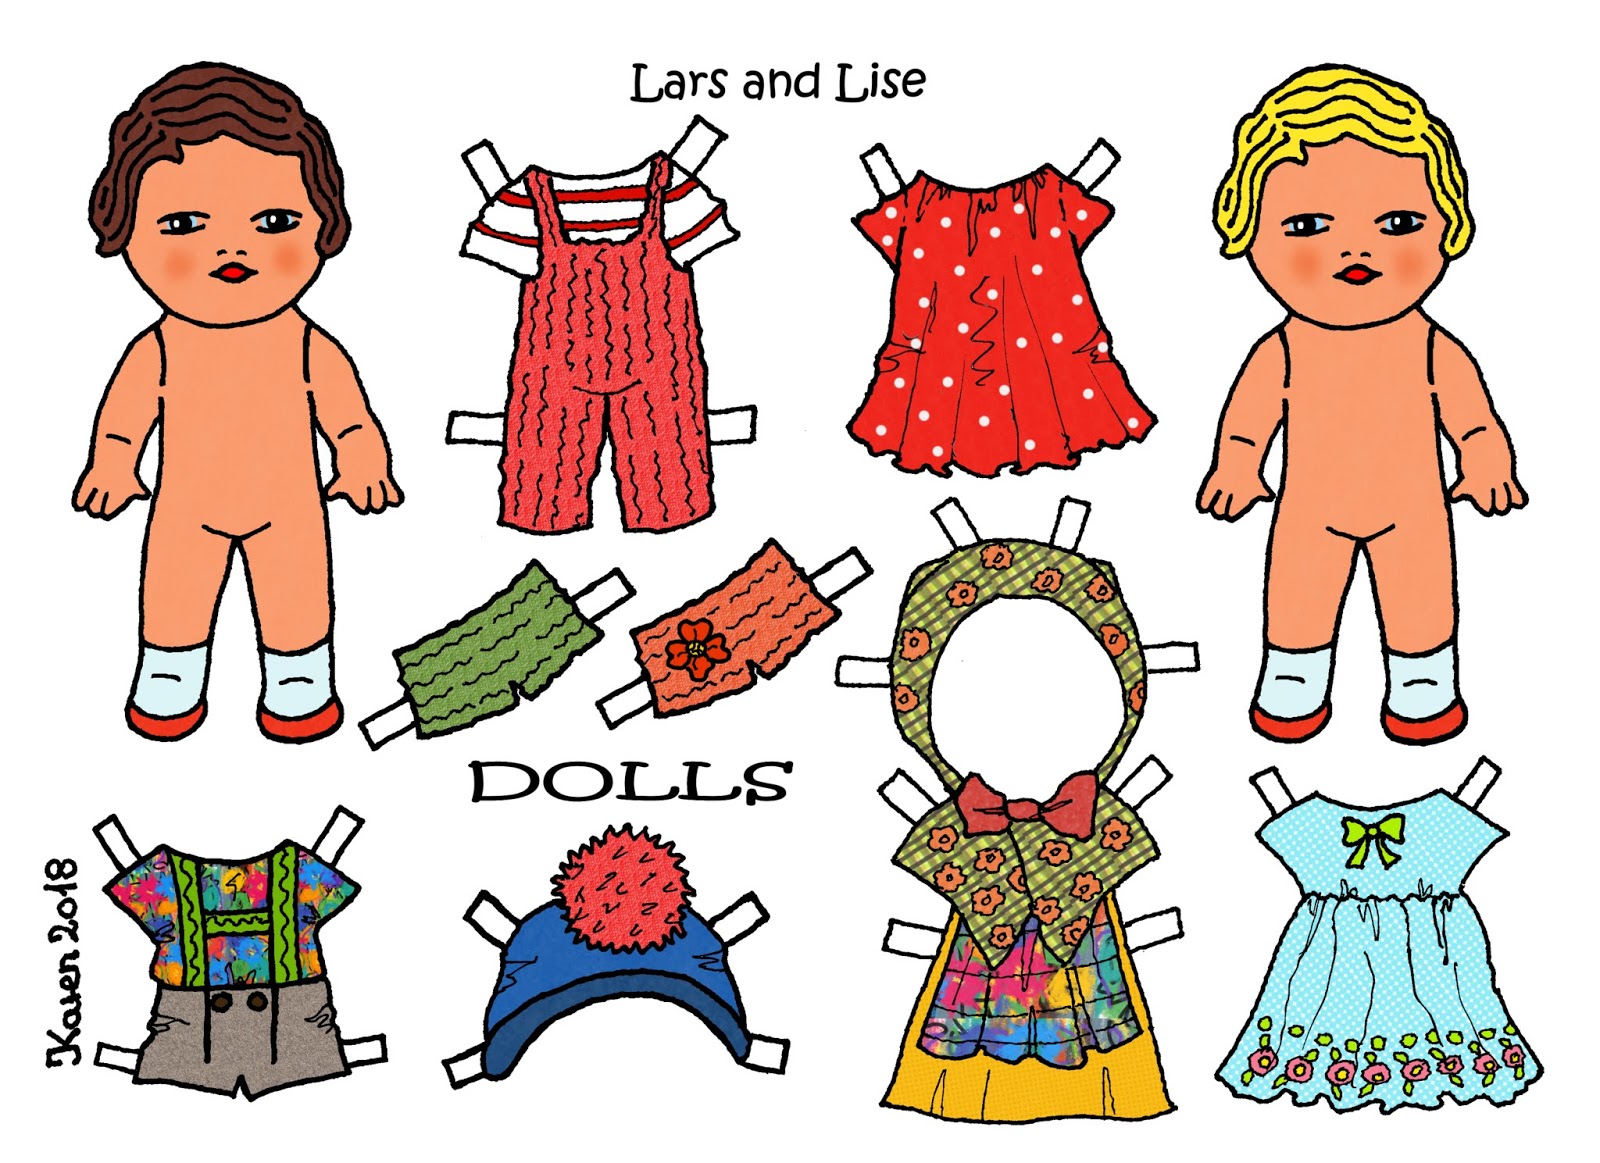 Link to: Lars and Lise Paper Dolls.